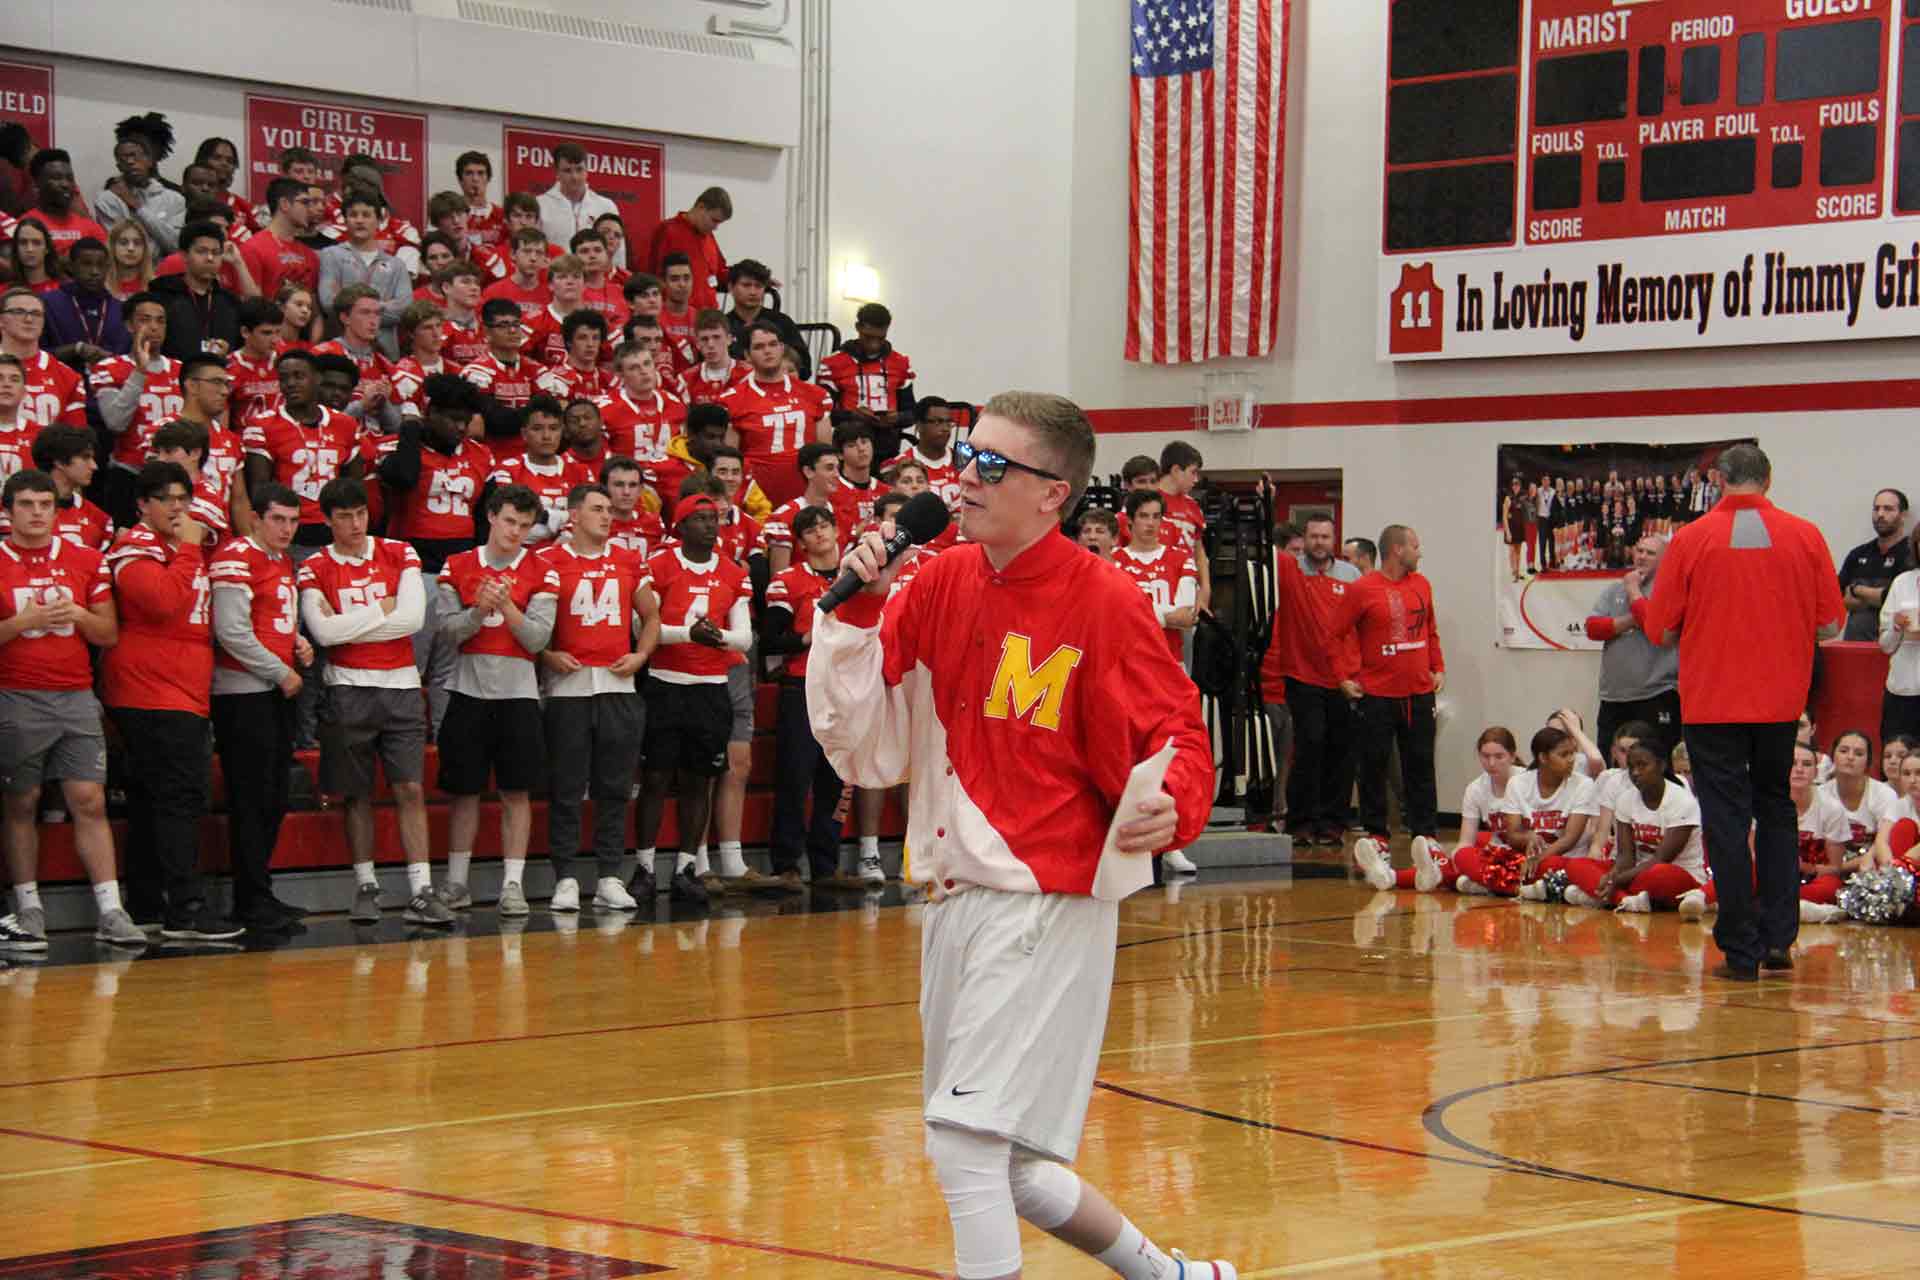 homecoming-rally-2019-student-speaking-with-sunglasses